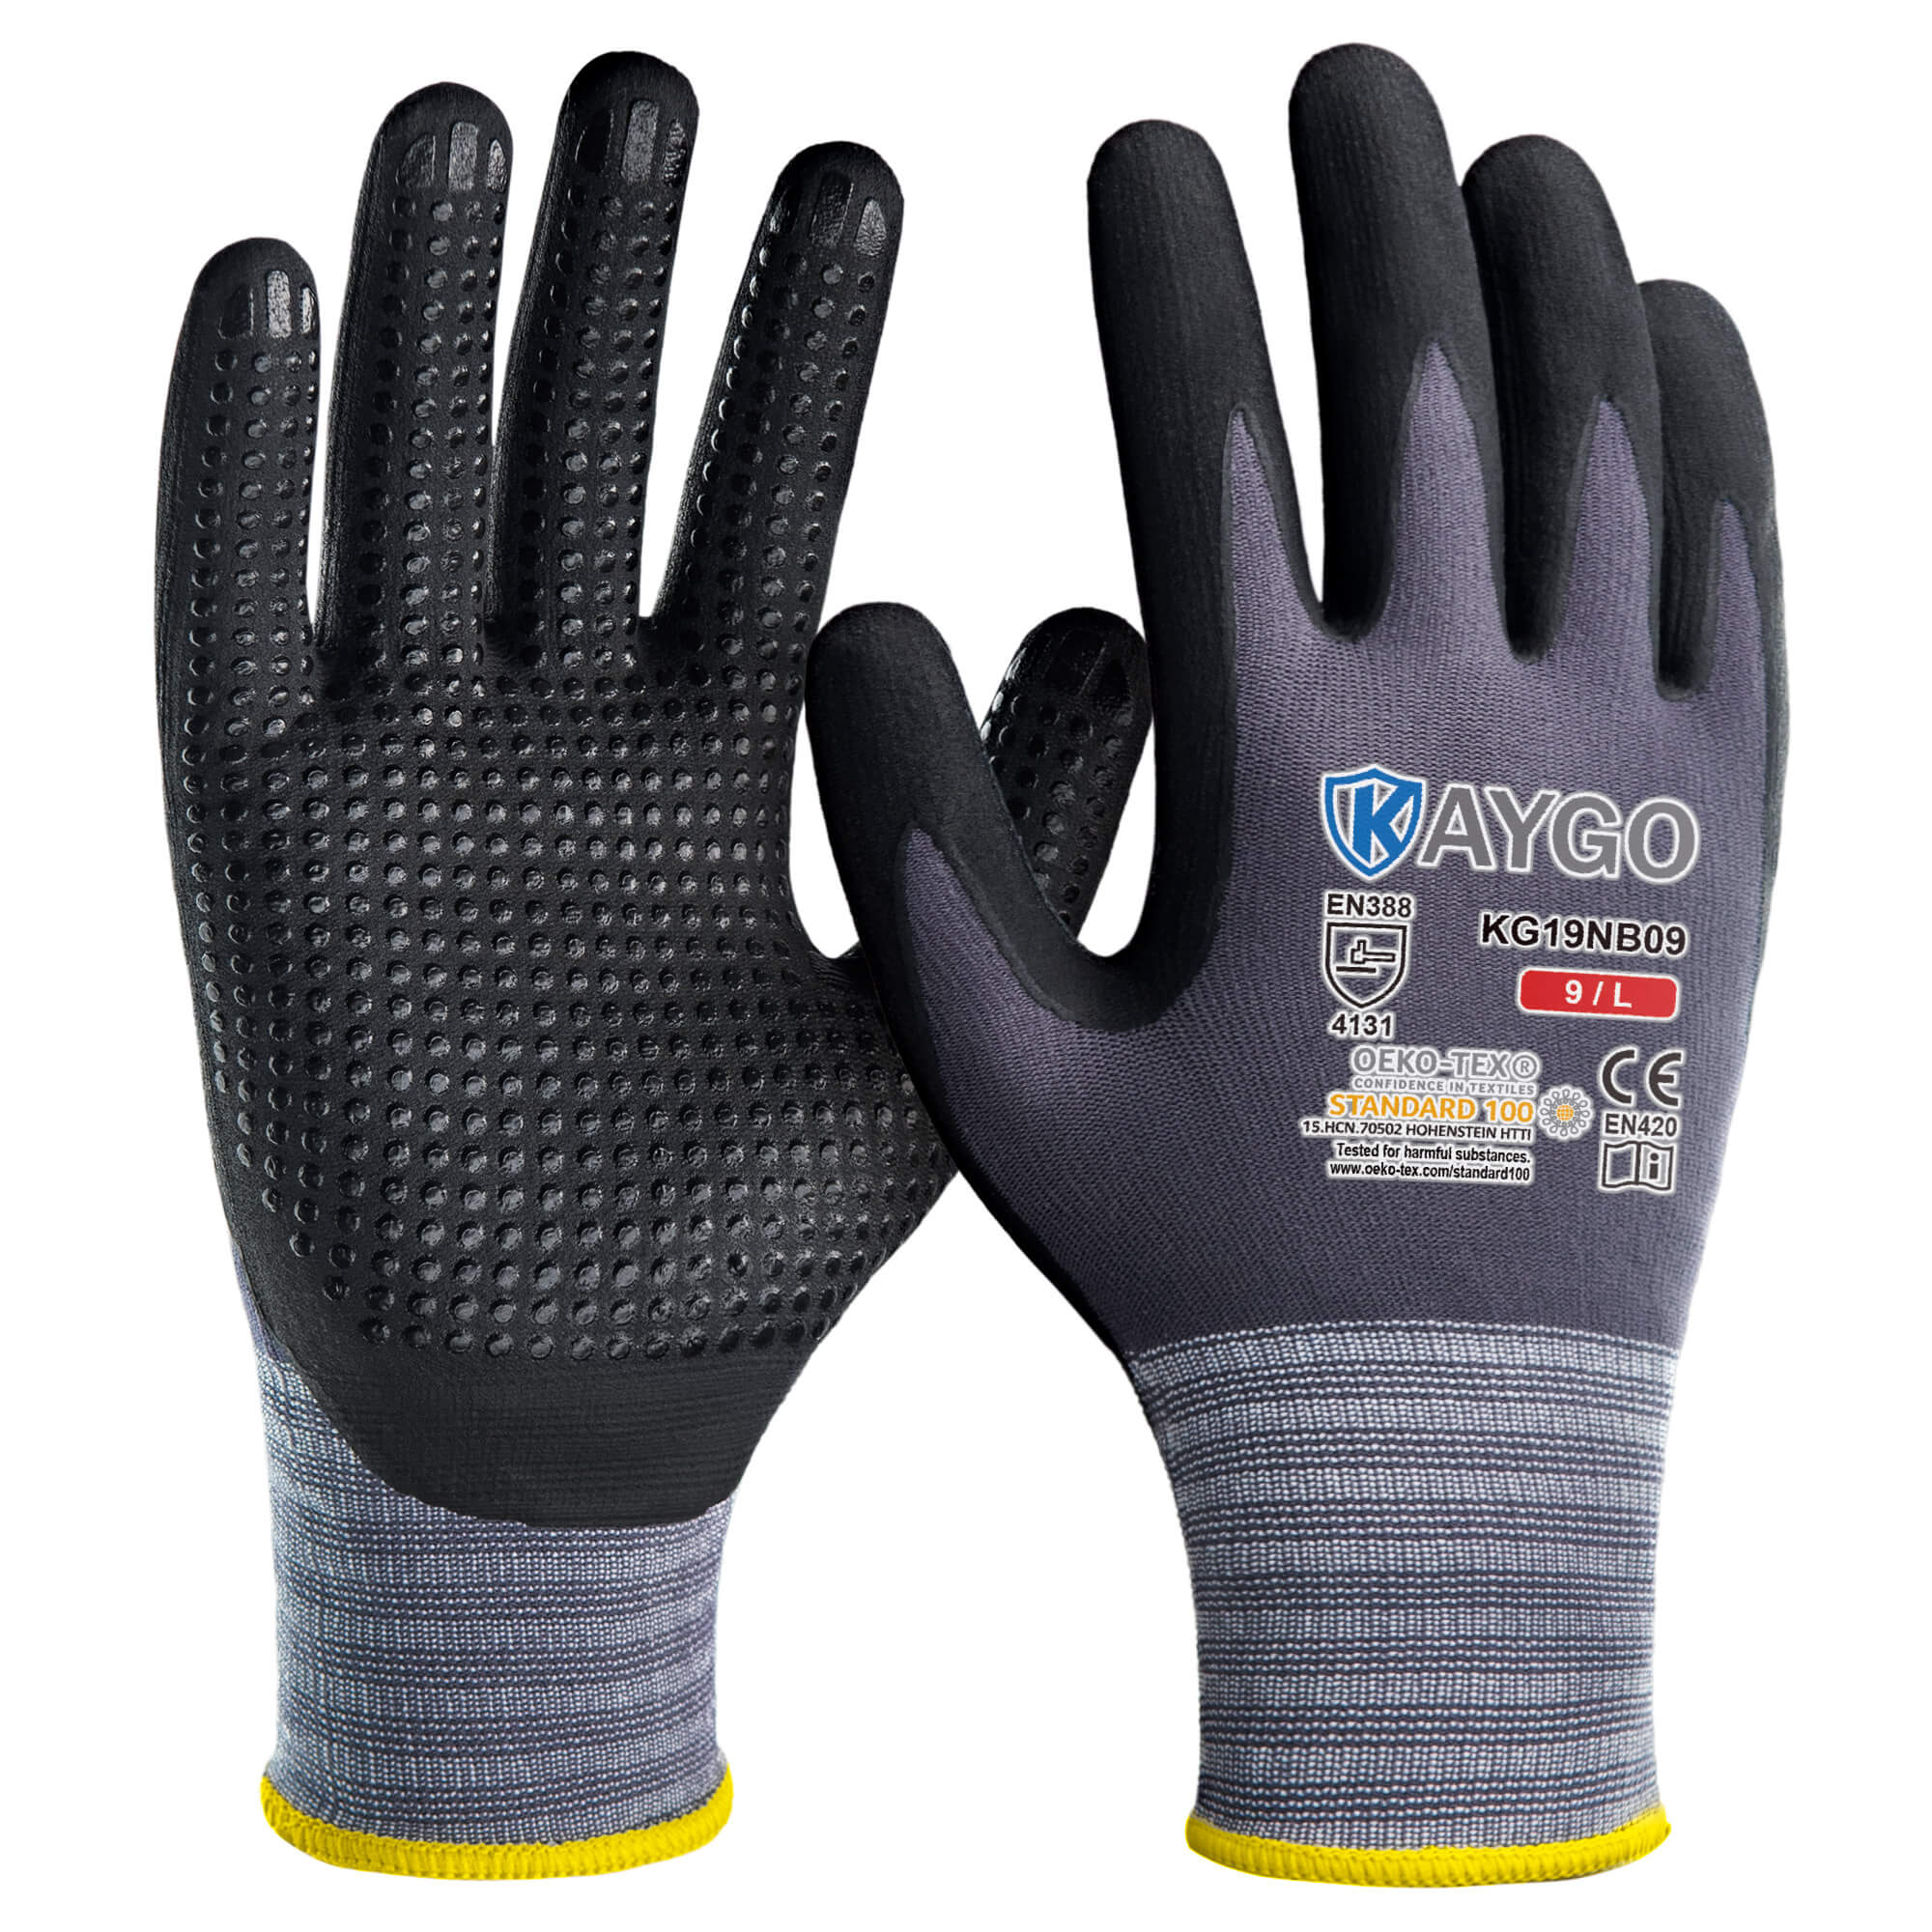 Seamless Knit Nylon Work Gloves with Micro Dotted Grip